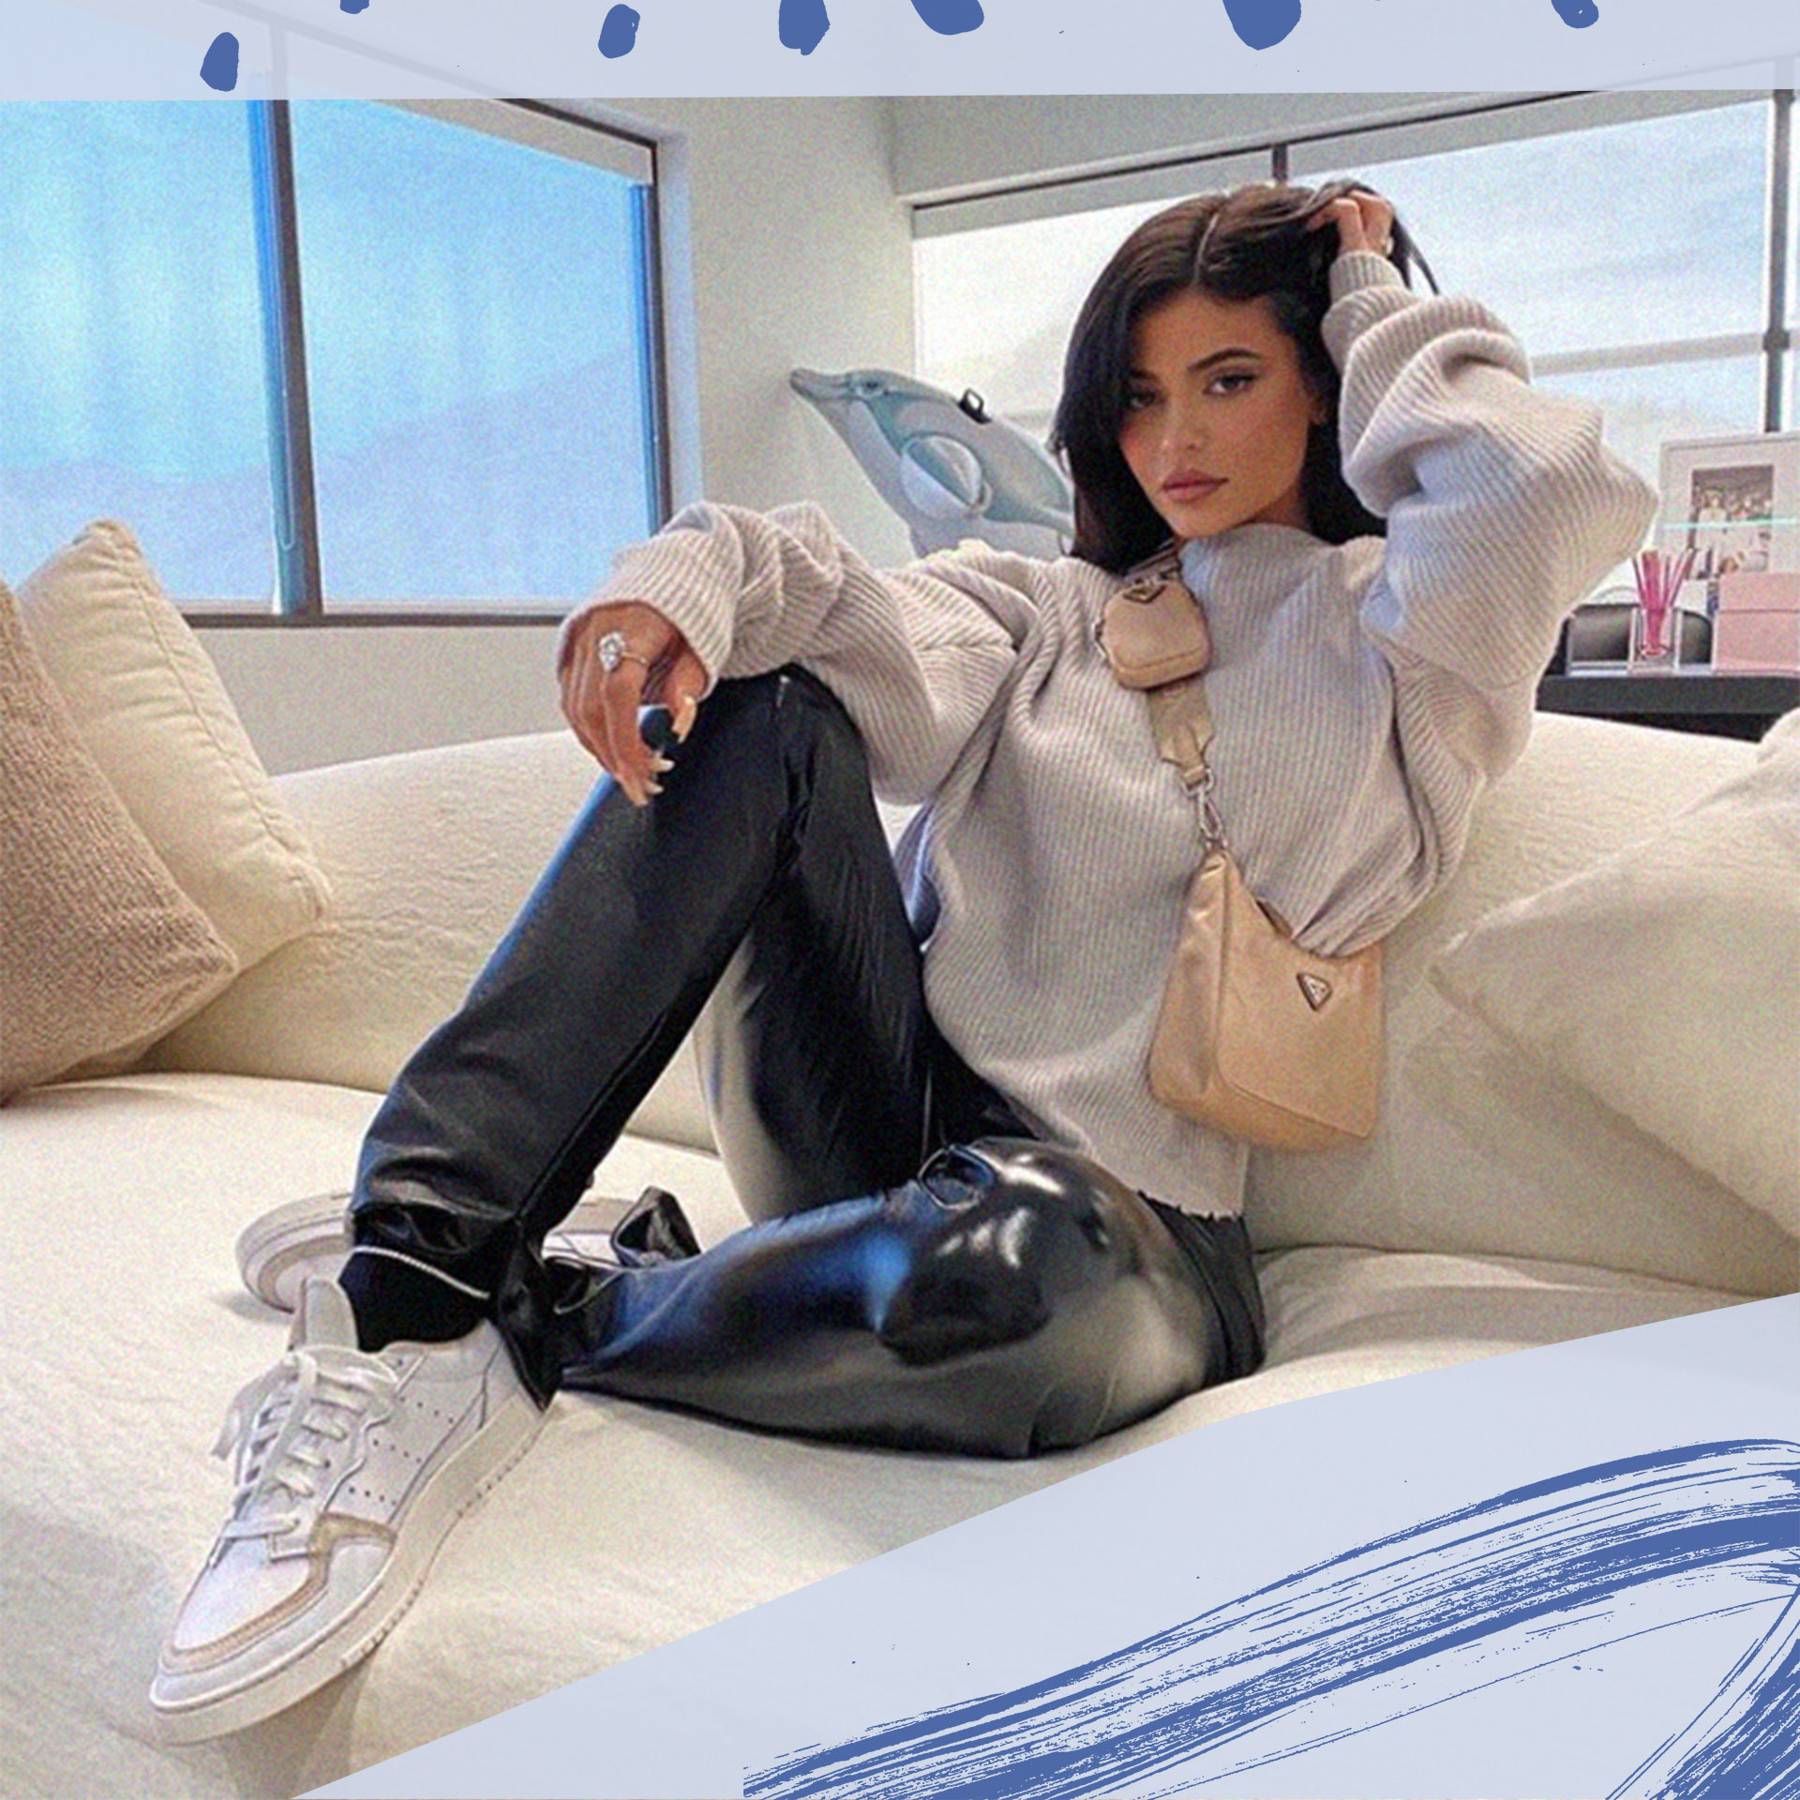 kylie jenner white trainers